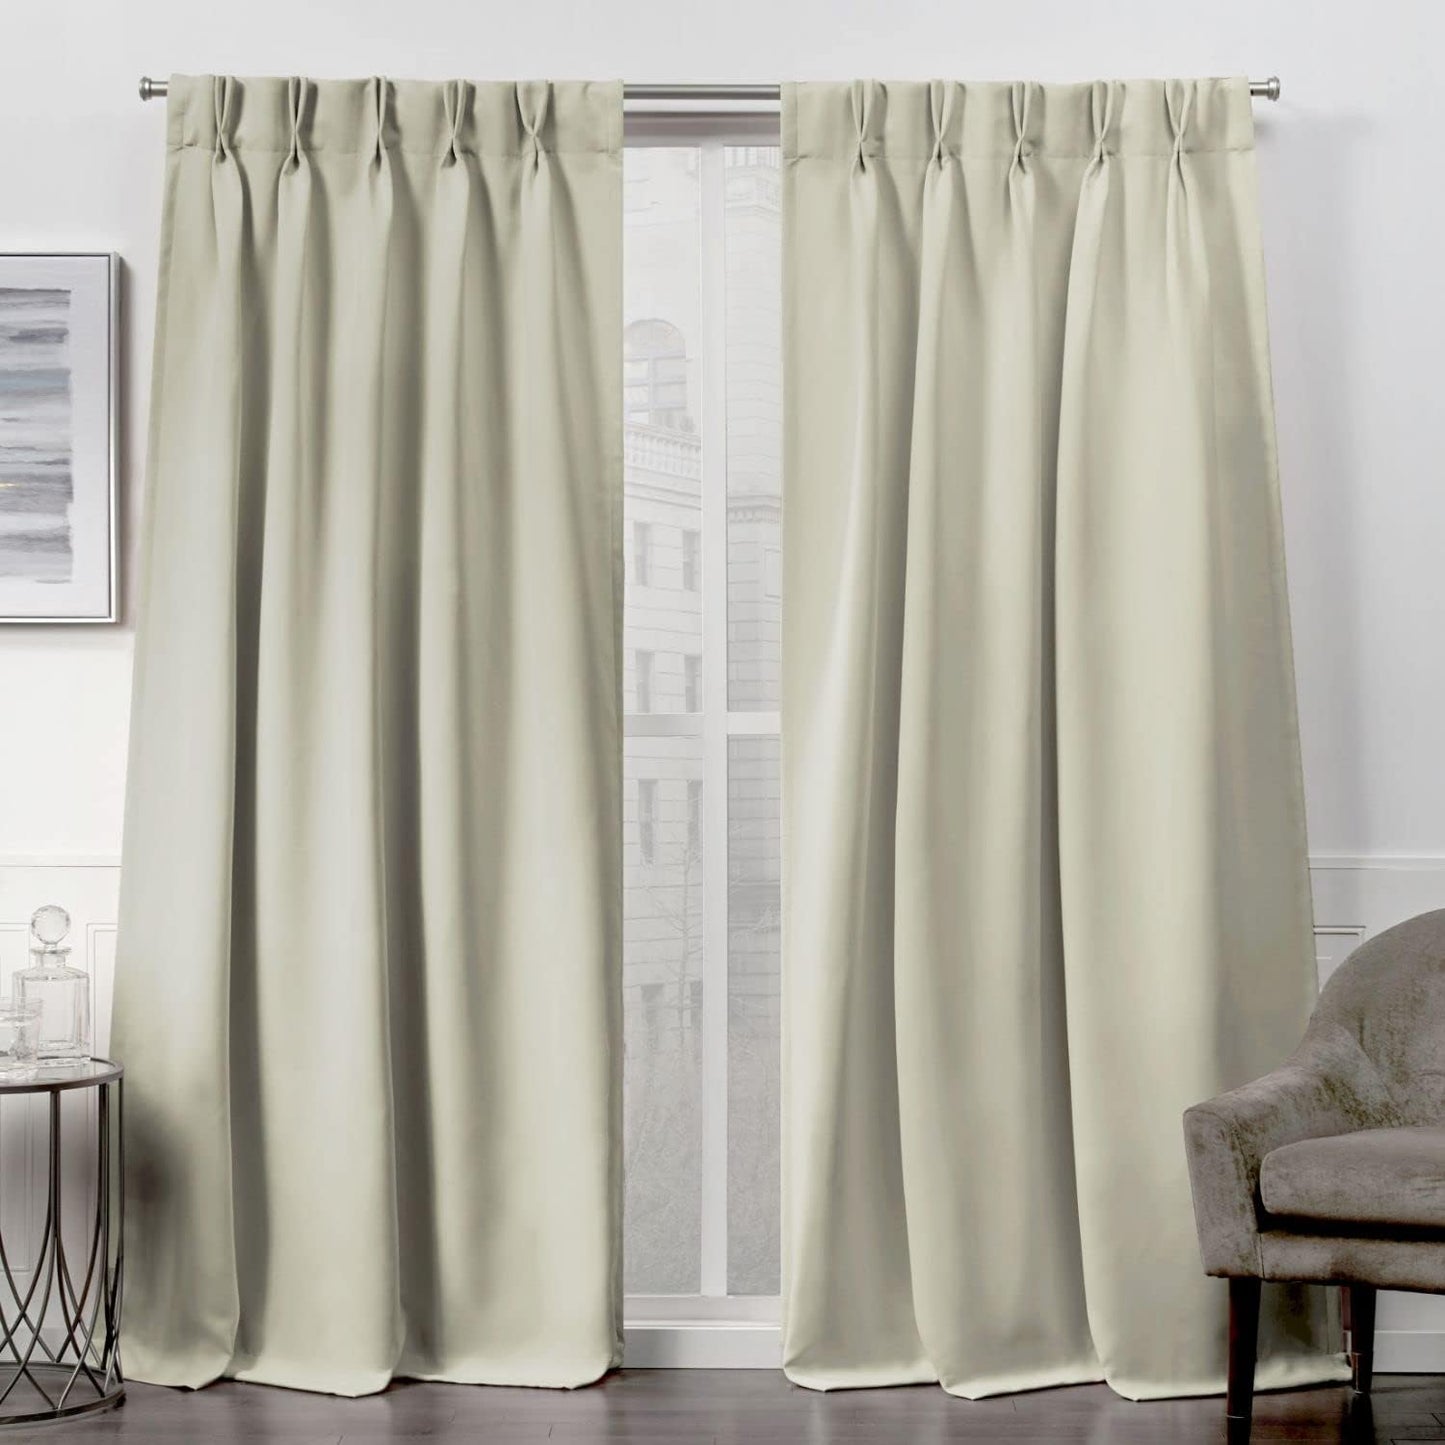 Exclusive Home Sateen Twill Woven Room Darkening Blackout Pinch Pleat/Hidden Tab Top Curtain Panel Pair, 63" Length, Charcoal  Exclusive Home Curtains Linen 84" Length 